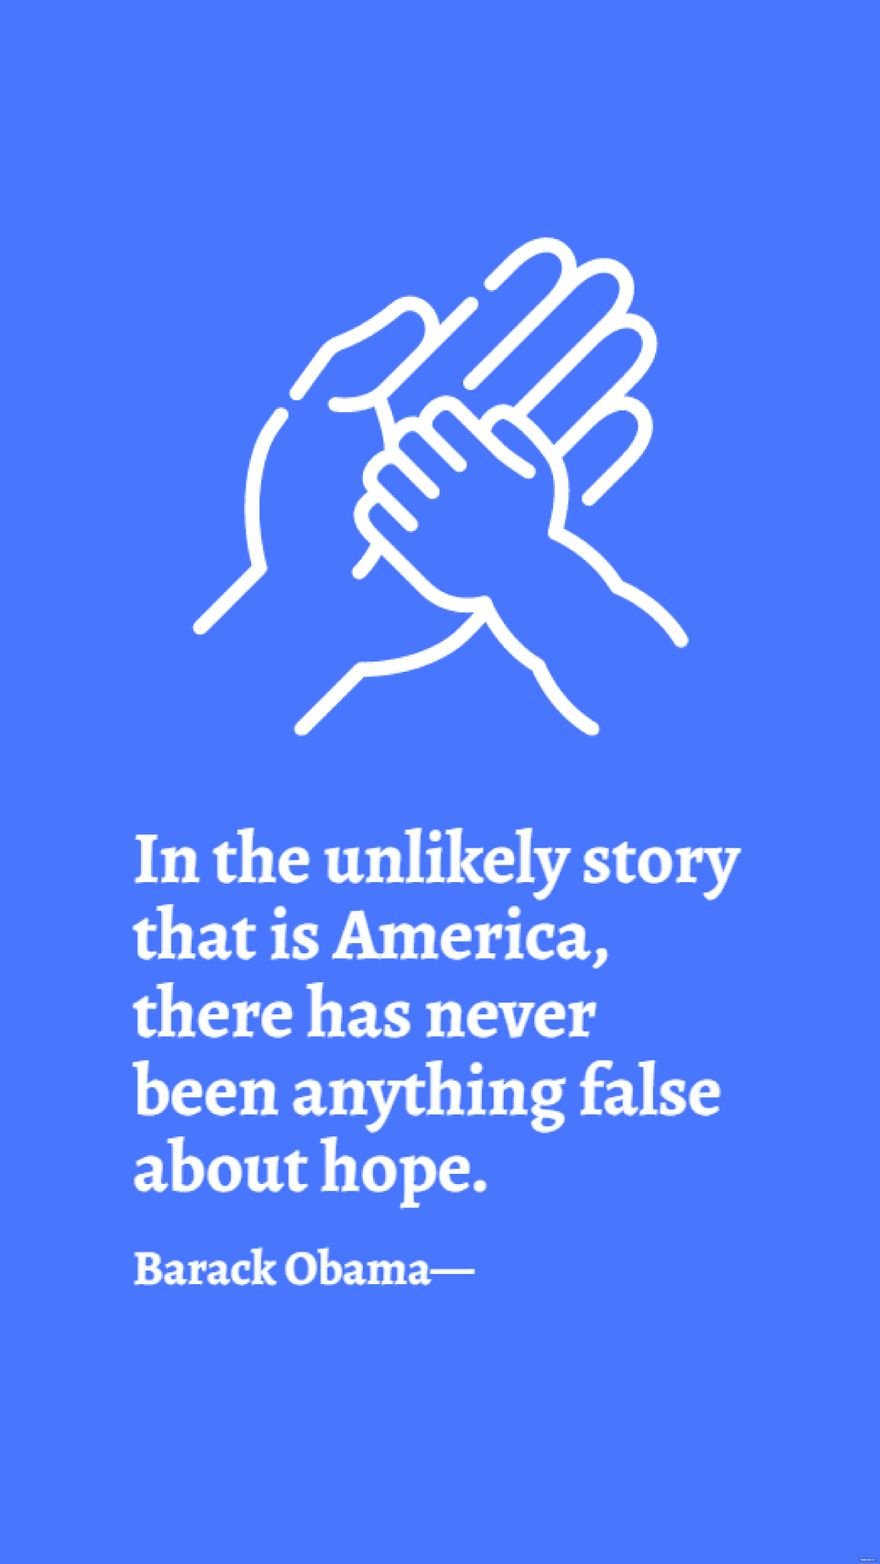 Barack Obama - In the unlikely story that is America, there has never been anything false about hope in JPG